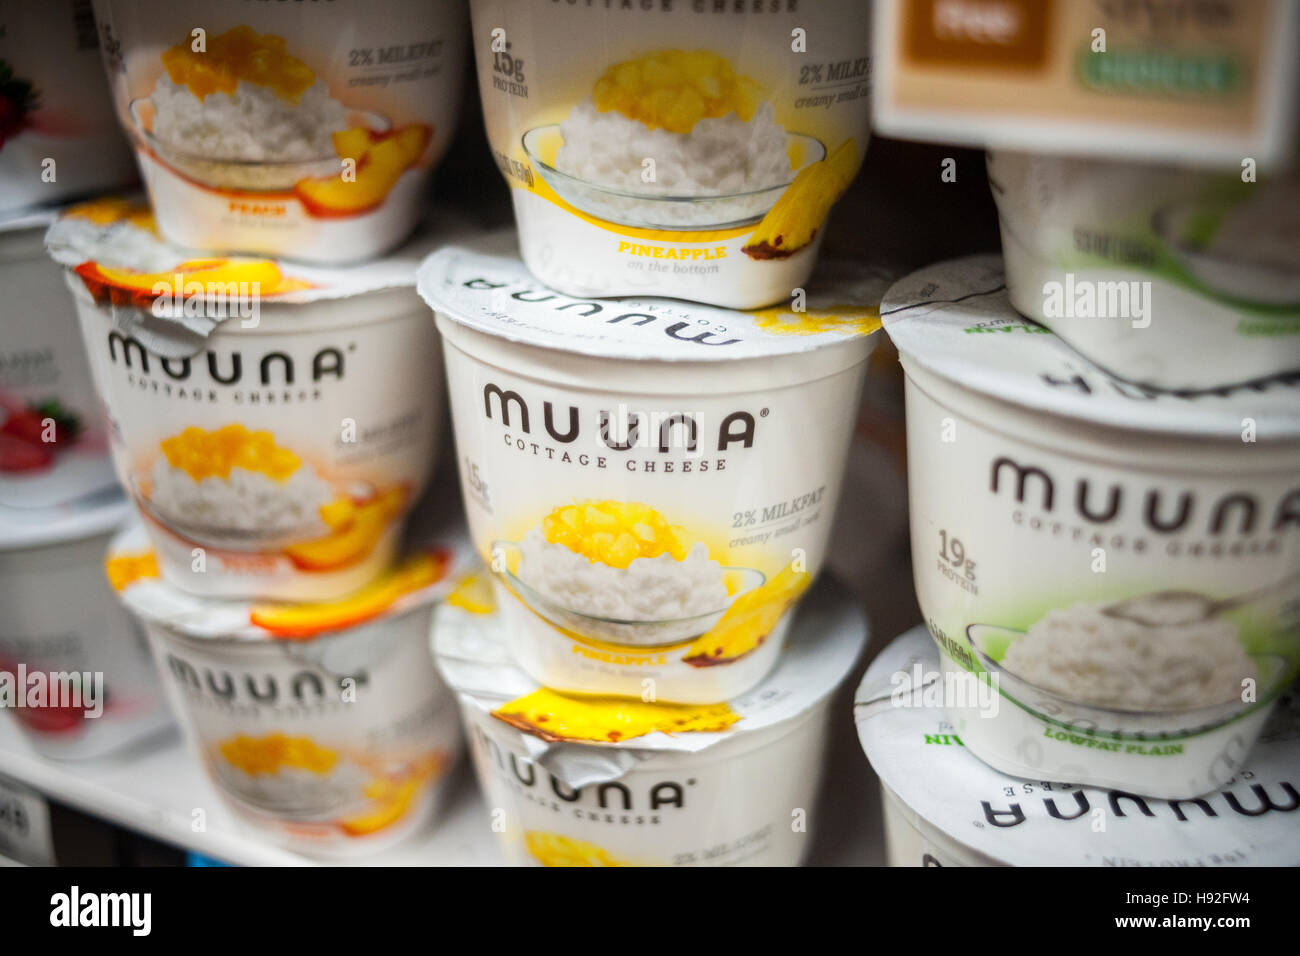 Containers Of Muuna Brand Flavored Cottage Cheese In A Supermarket